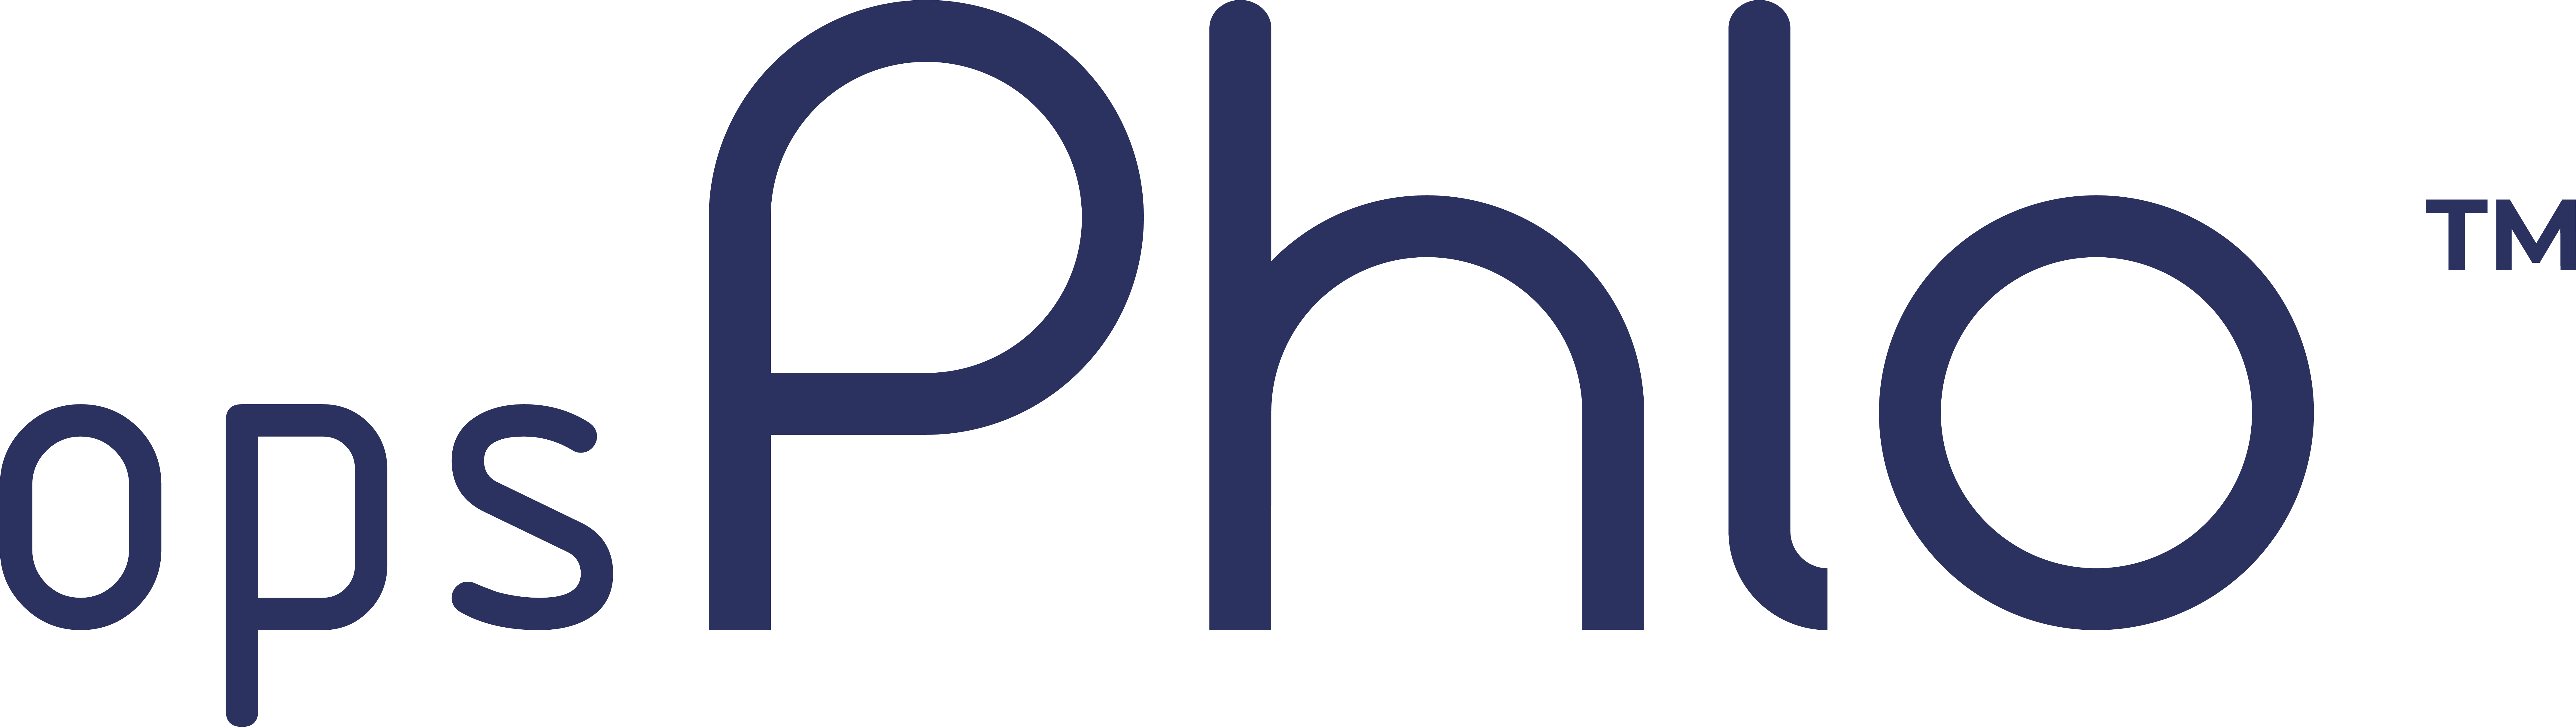 Phlo Systems Limited - opsPhlo - Commodity Trade and Risk Management Software with ERP